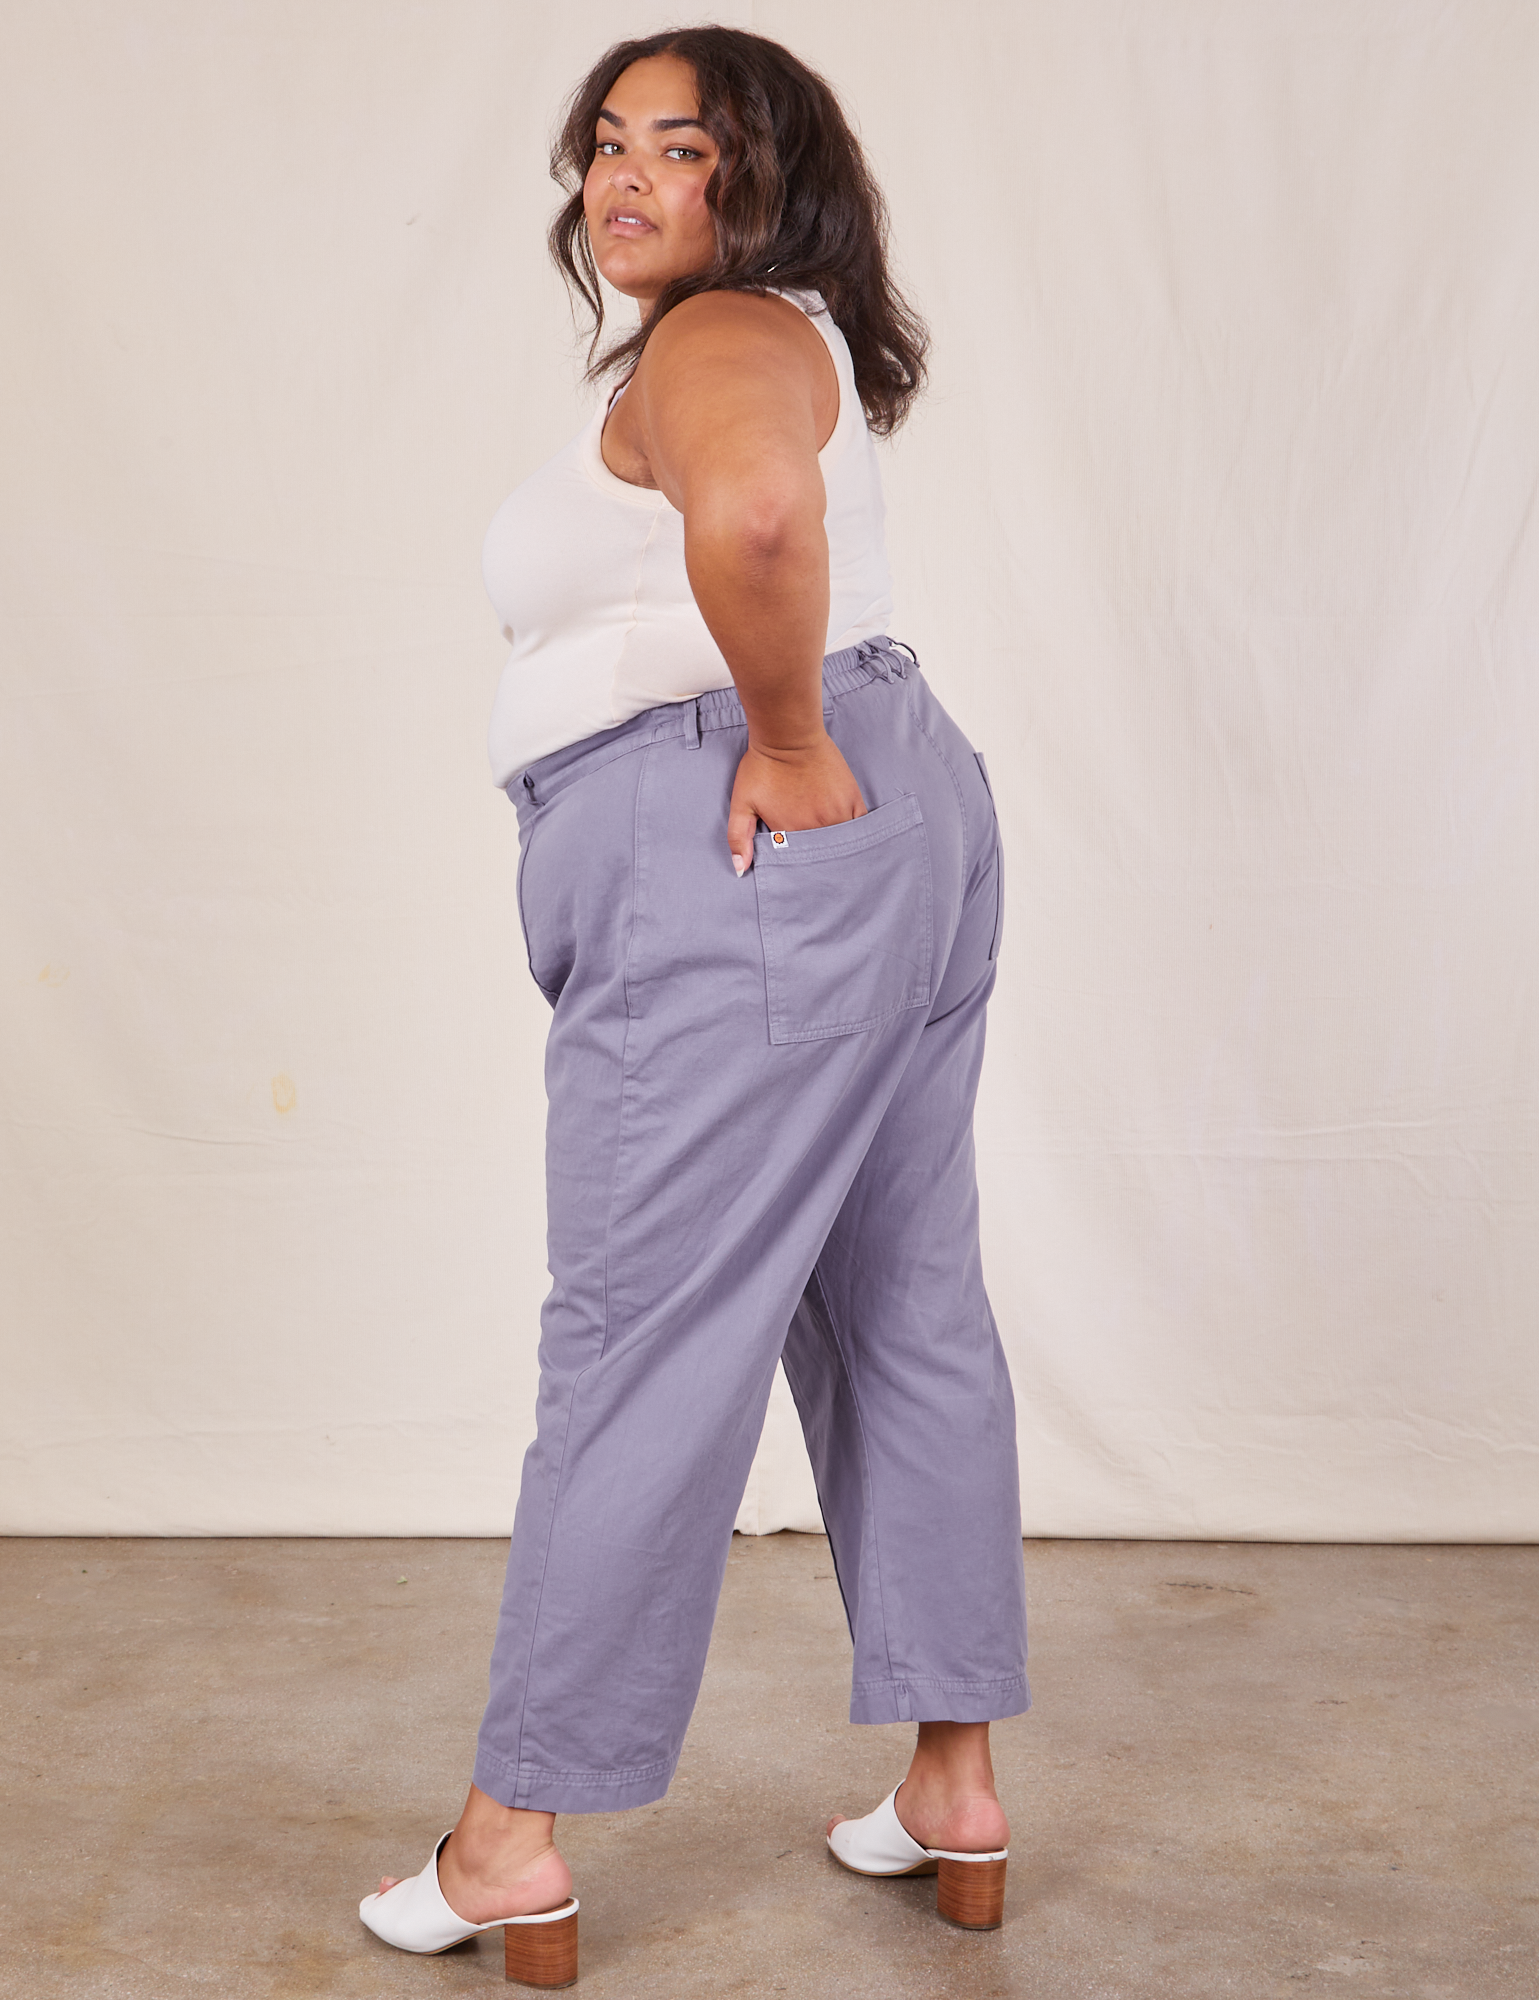 Side view of Western Pants in Faded Grape worn by Alicia. She has her hand in one of the pockets.